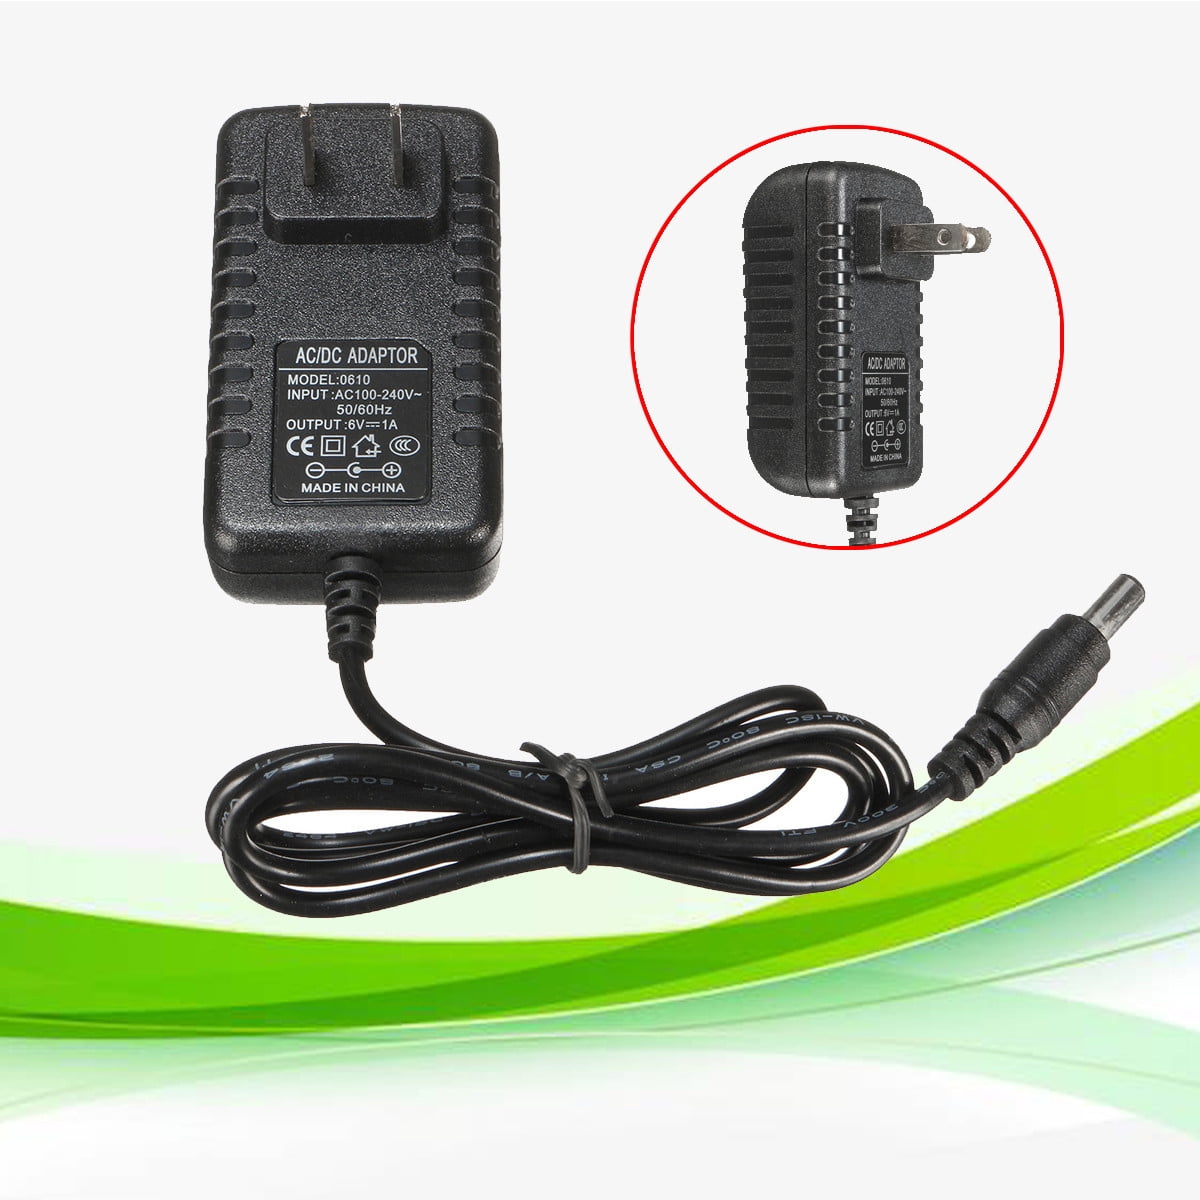 charger AC adapter FOR SKY3725 Best Choice ATV Quad 4-wheel Suspension ride on 